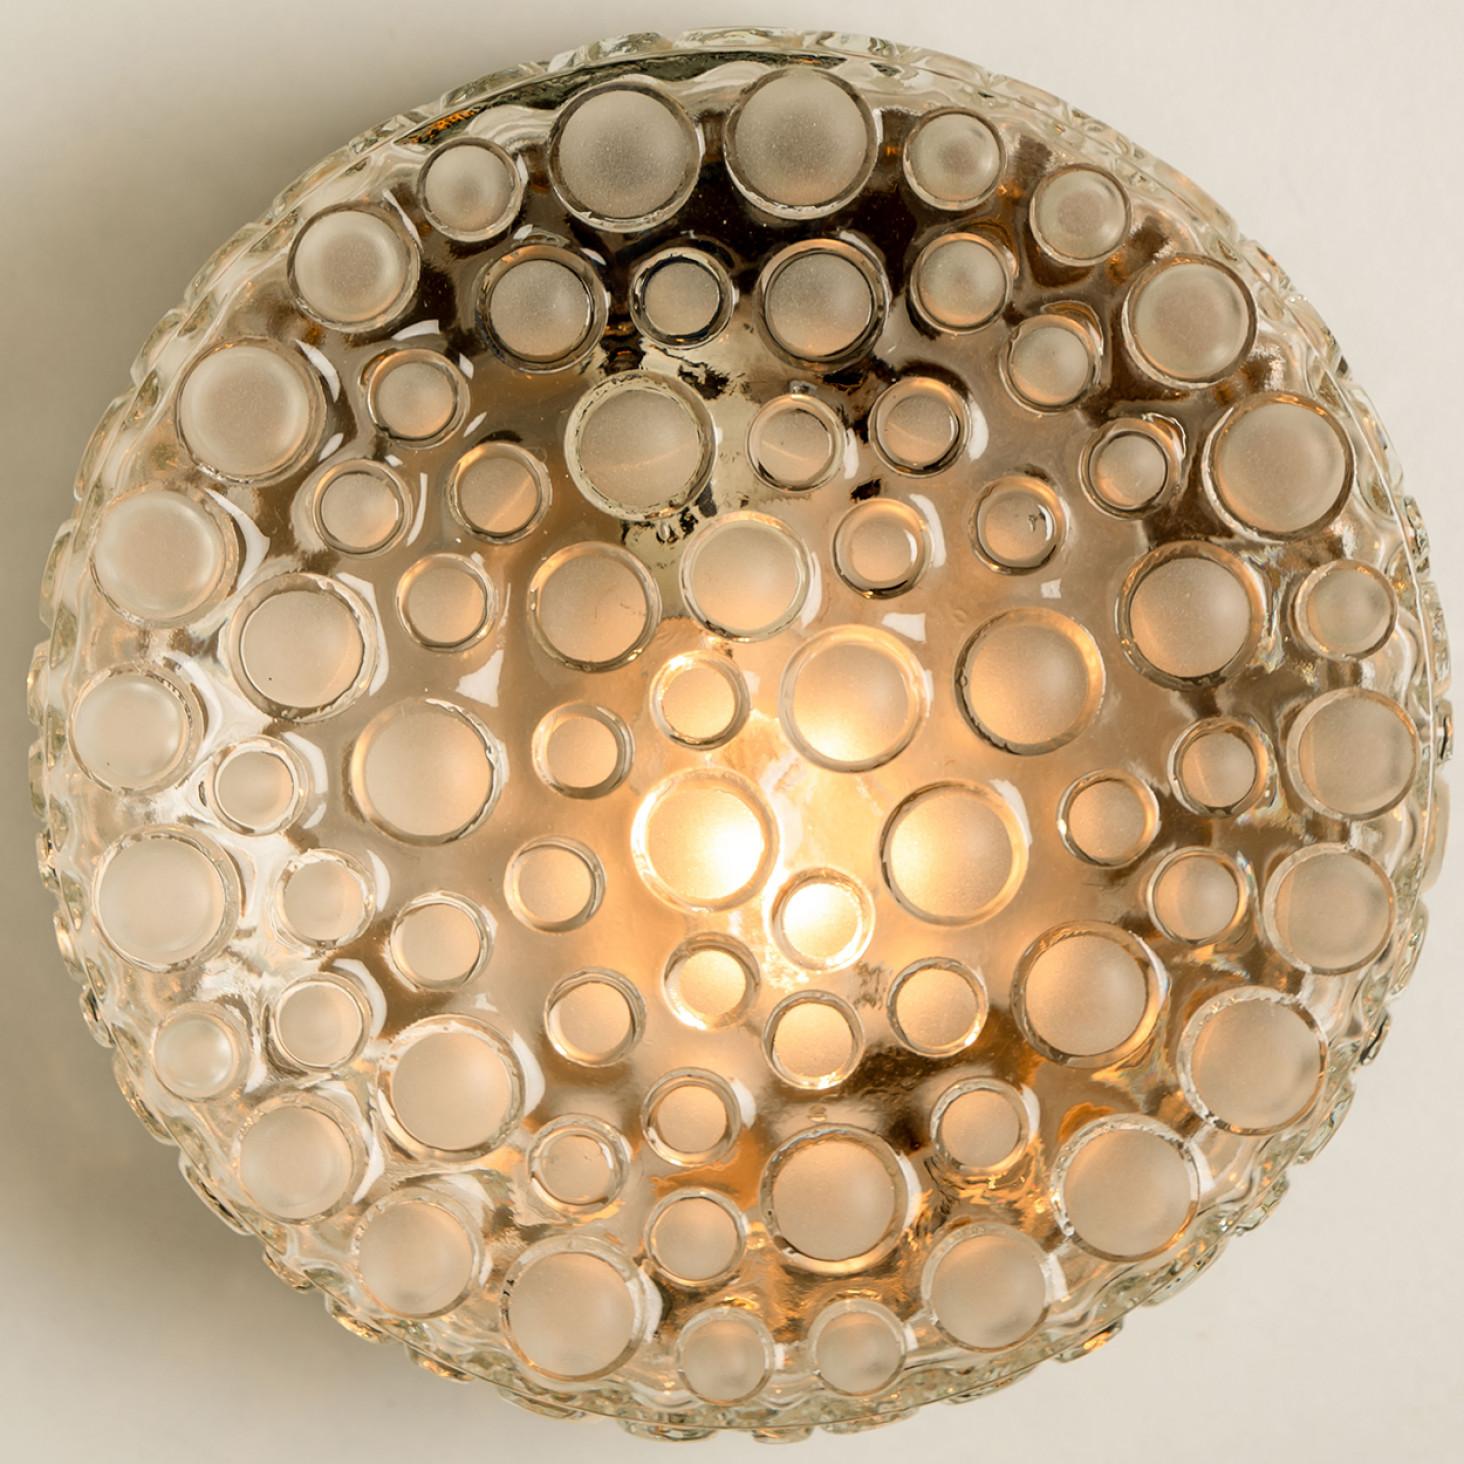 A handmade high quality light fixture made by Hillebrand, Germany, manufactured in the mid century, circa 1960 (at the end of 1960s and beginning of 1970s).

This flushmount or ceiling light features think textured dotted glass.
The texture refract